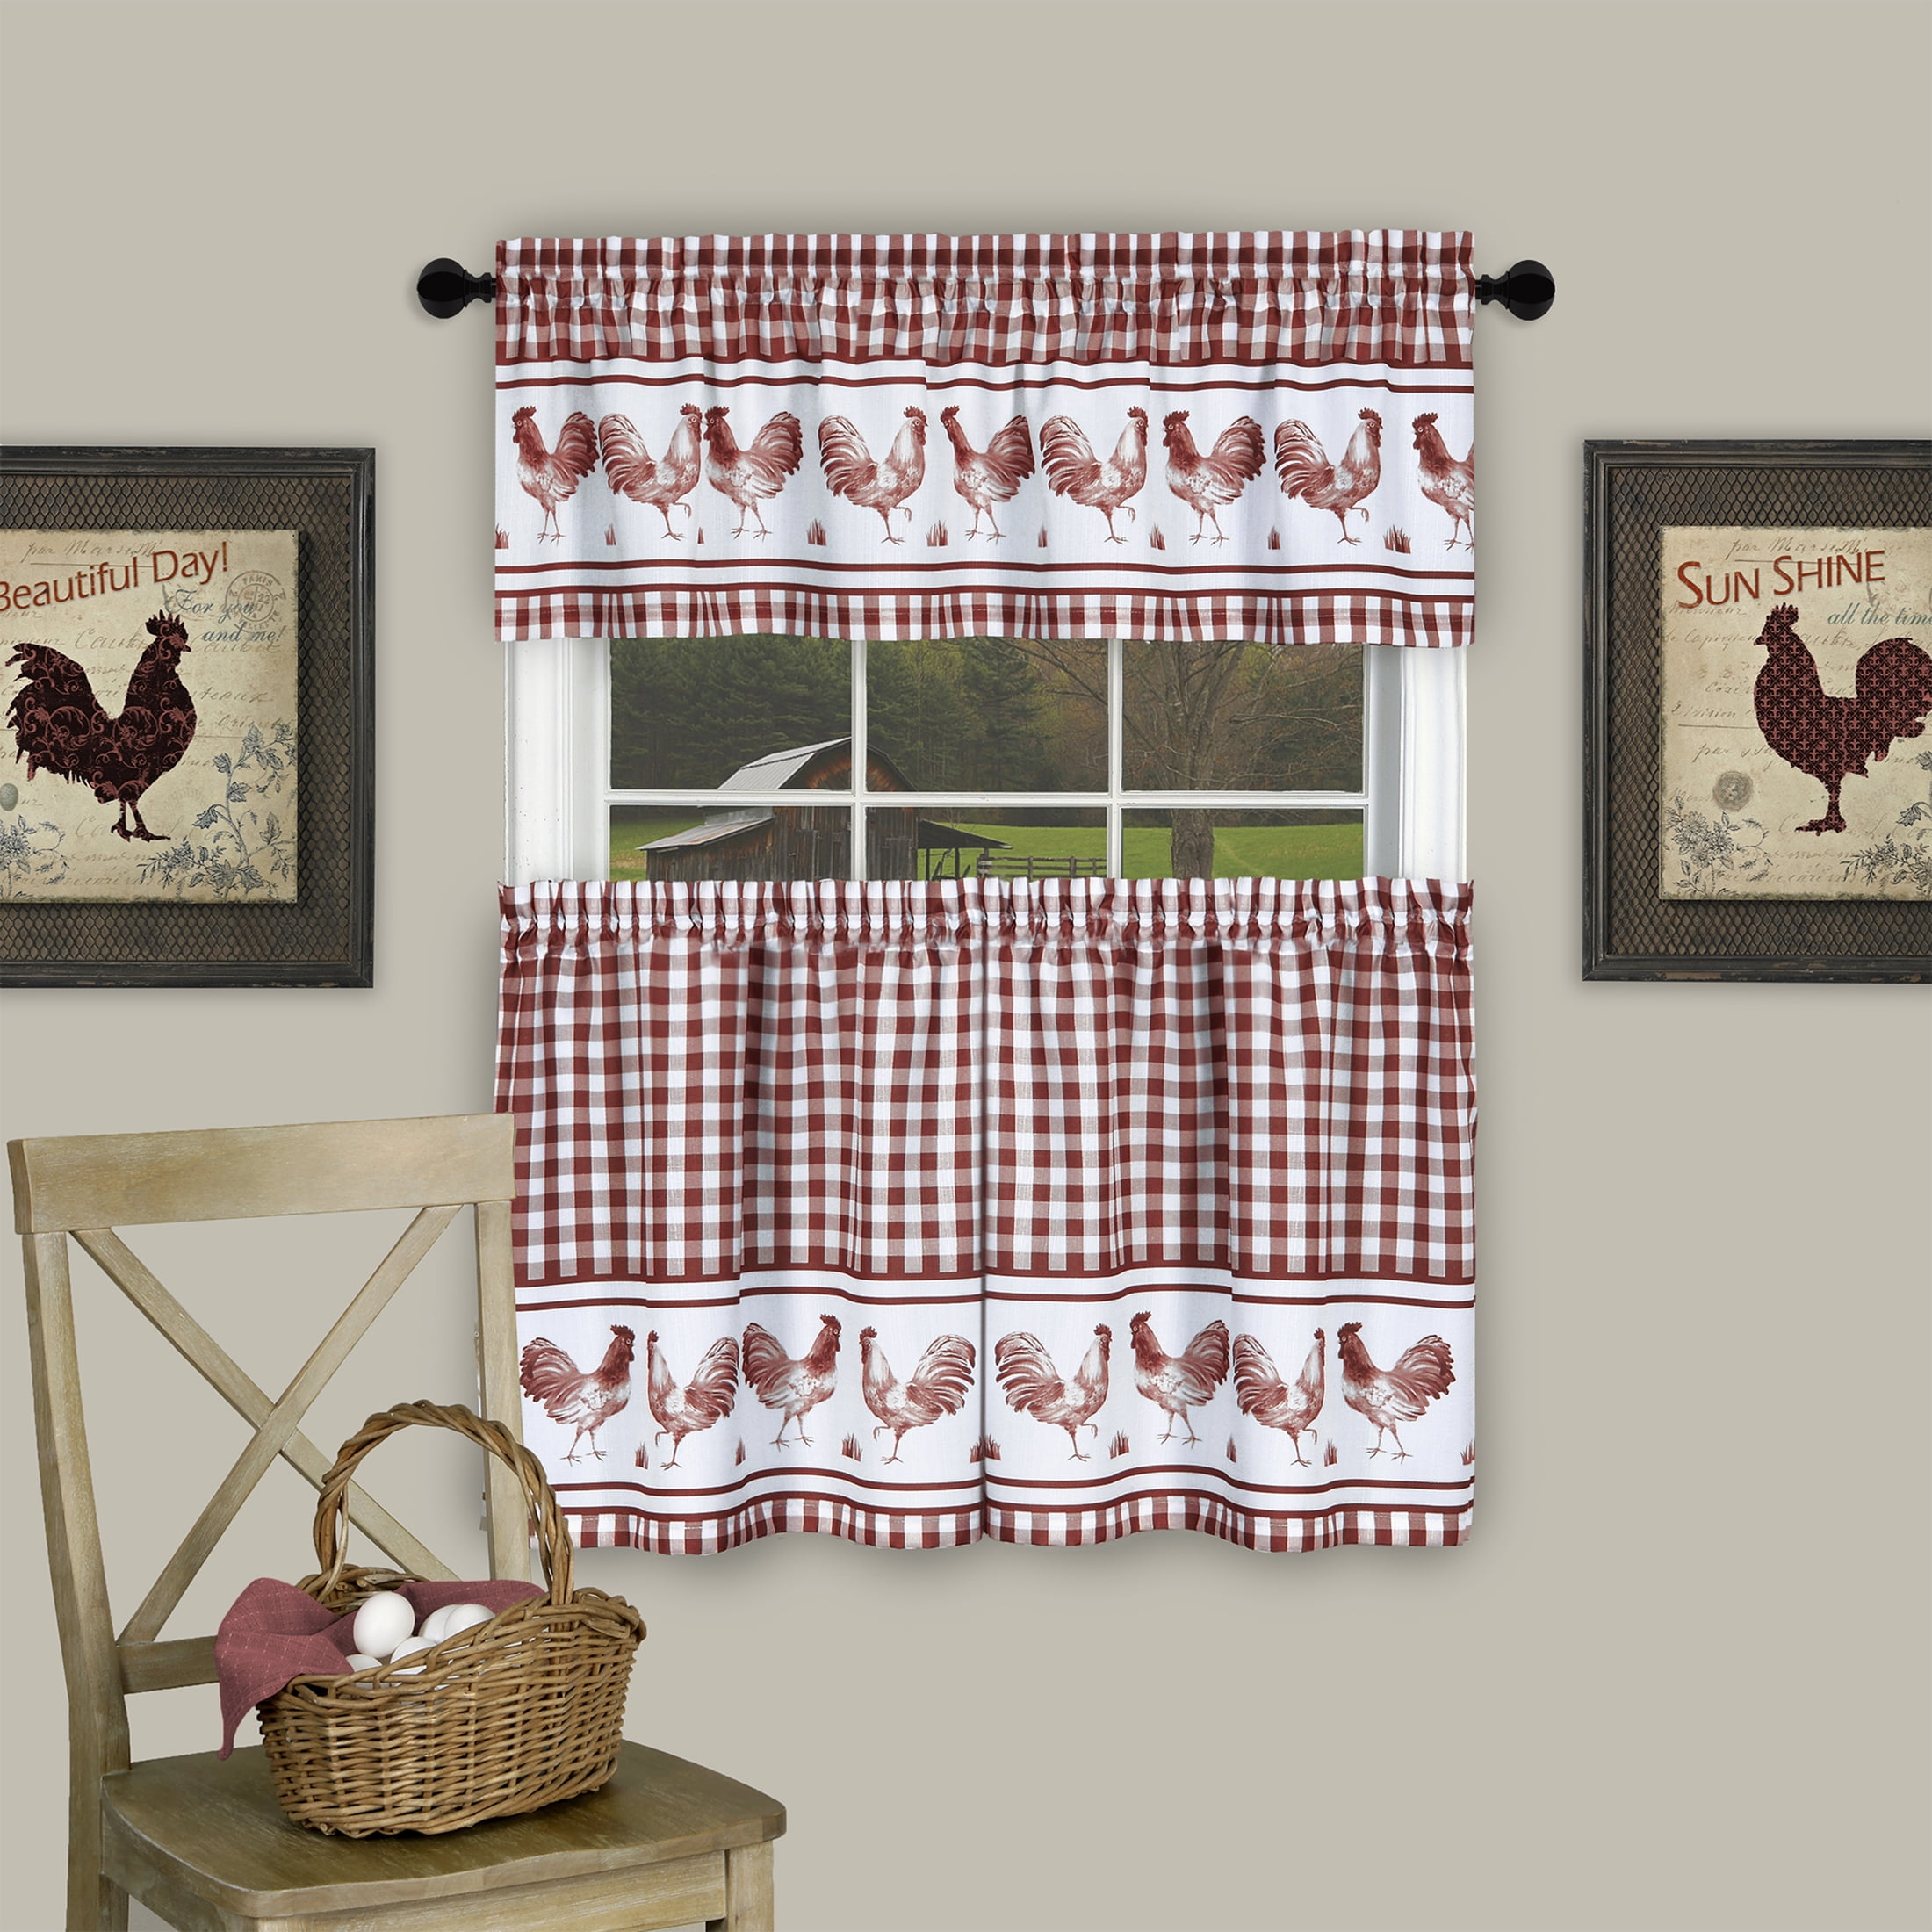 Powererusa 3 Piece Kitchen Curtain Set Gingham Tier Pair And Valance Country Rooster Decor For Living Room Premium Buffalo Plaid Curtains 58 W X 36 L Black Com